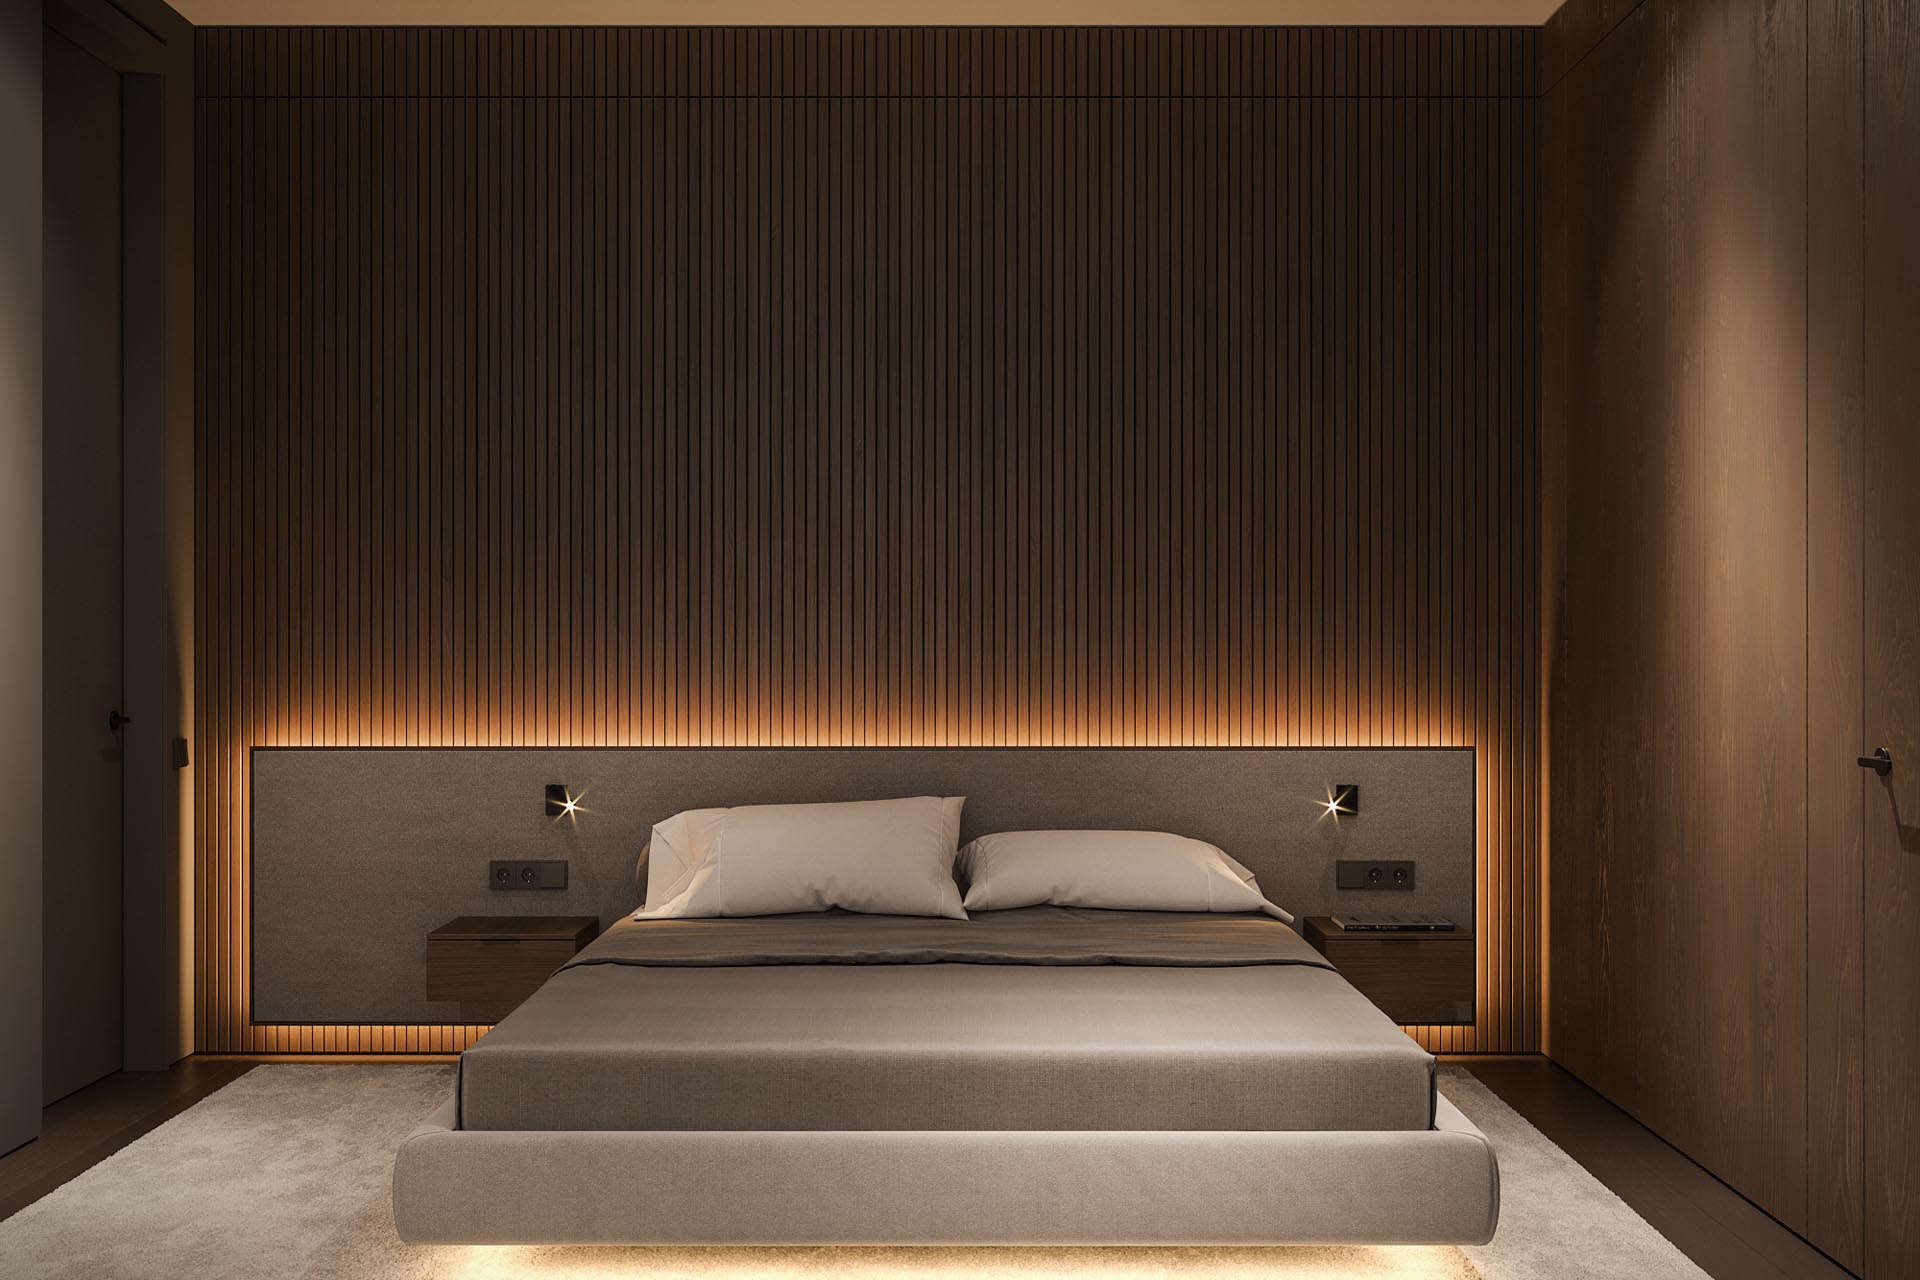 A Backlit Headboard Is A Bedroom Design Idea For Creating A Nice Glow Of Light